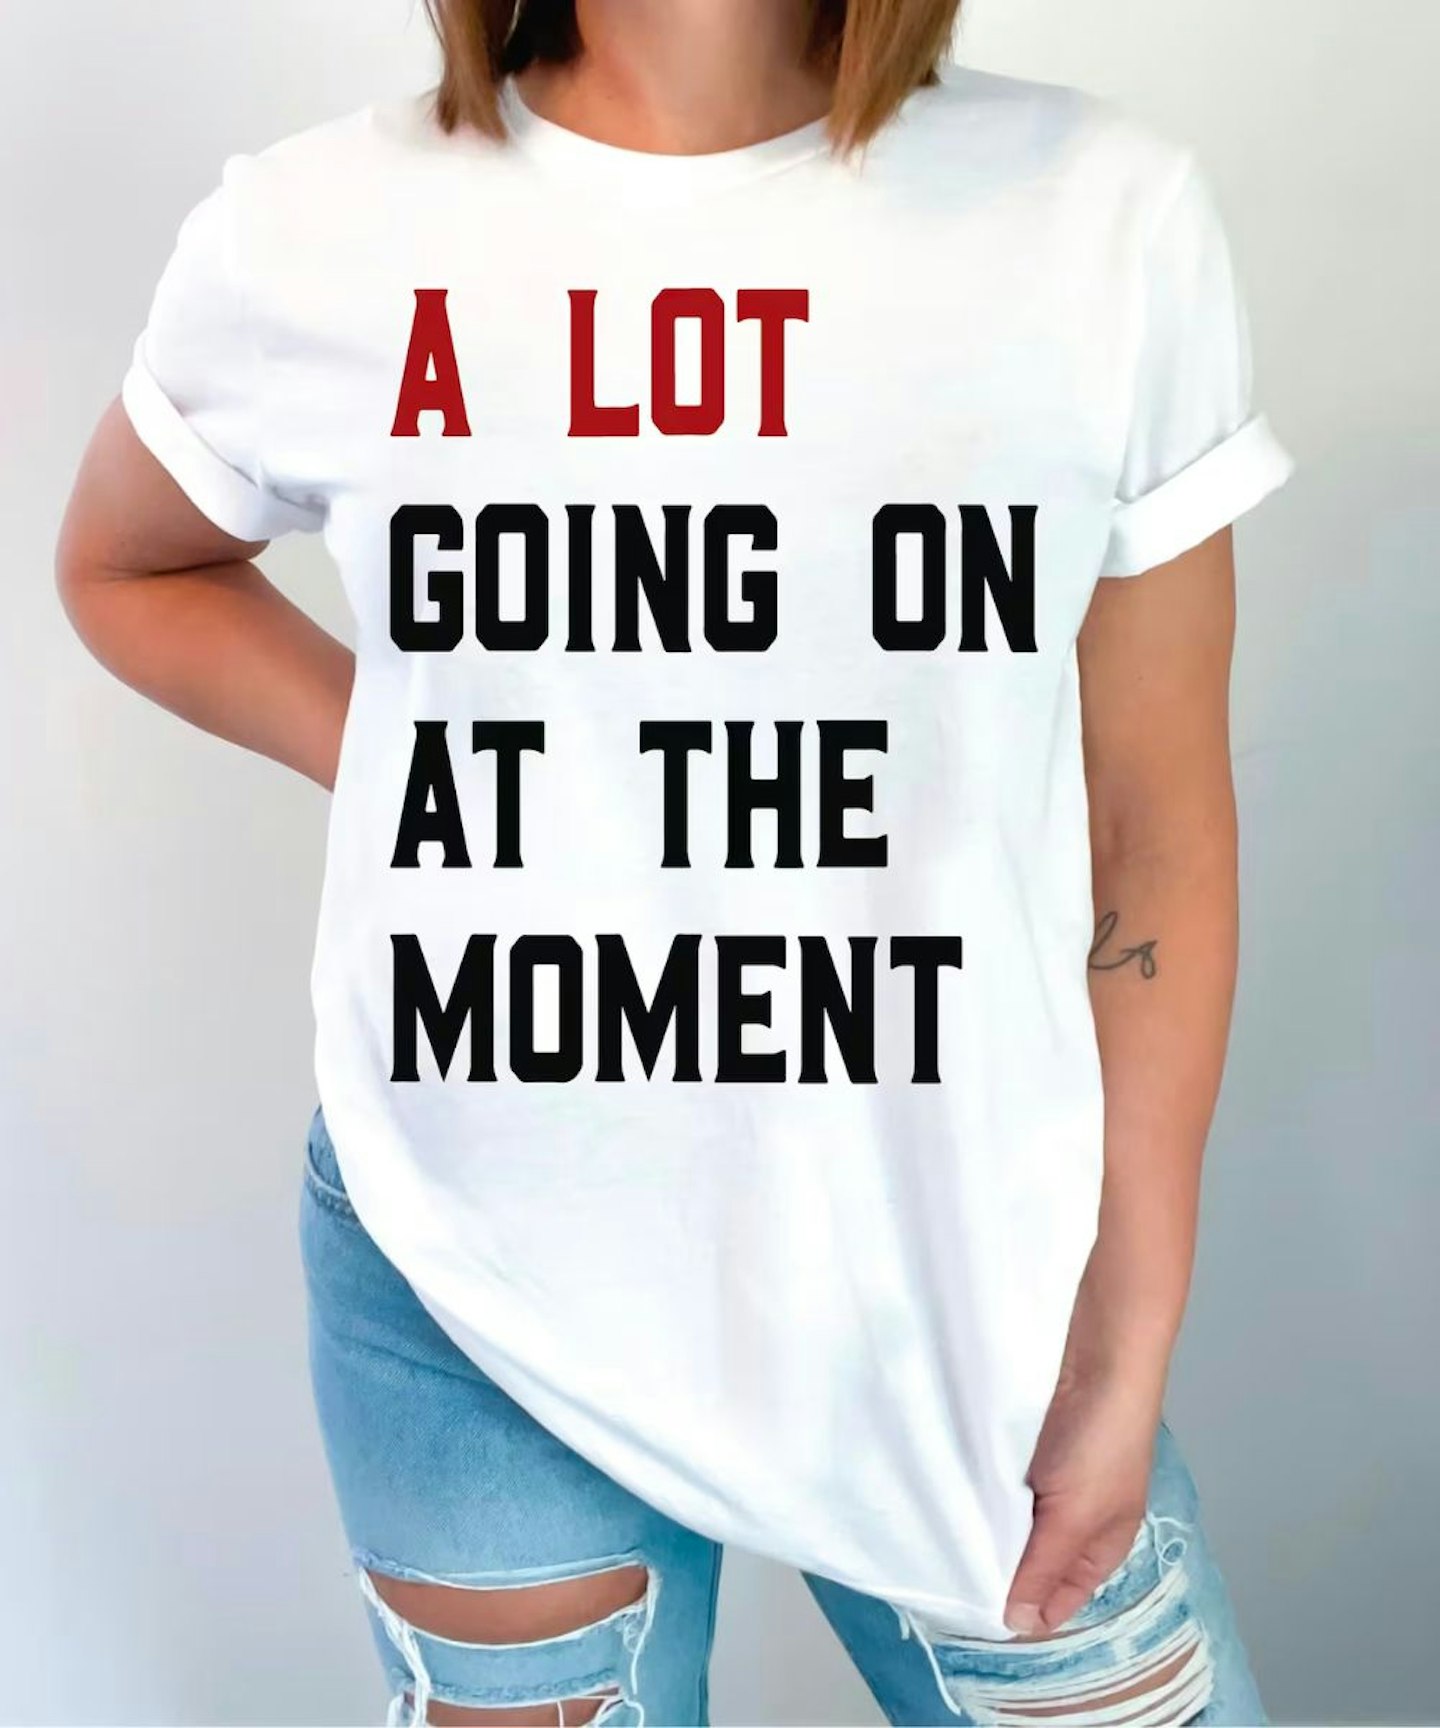 A Lot Going on at the Moment T-shirt